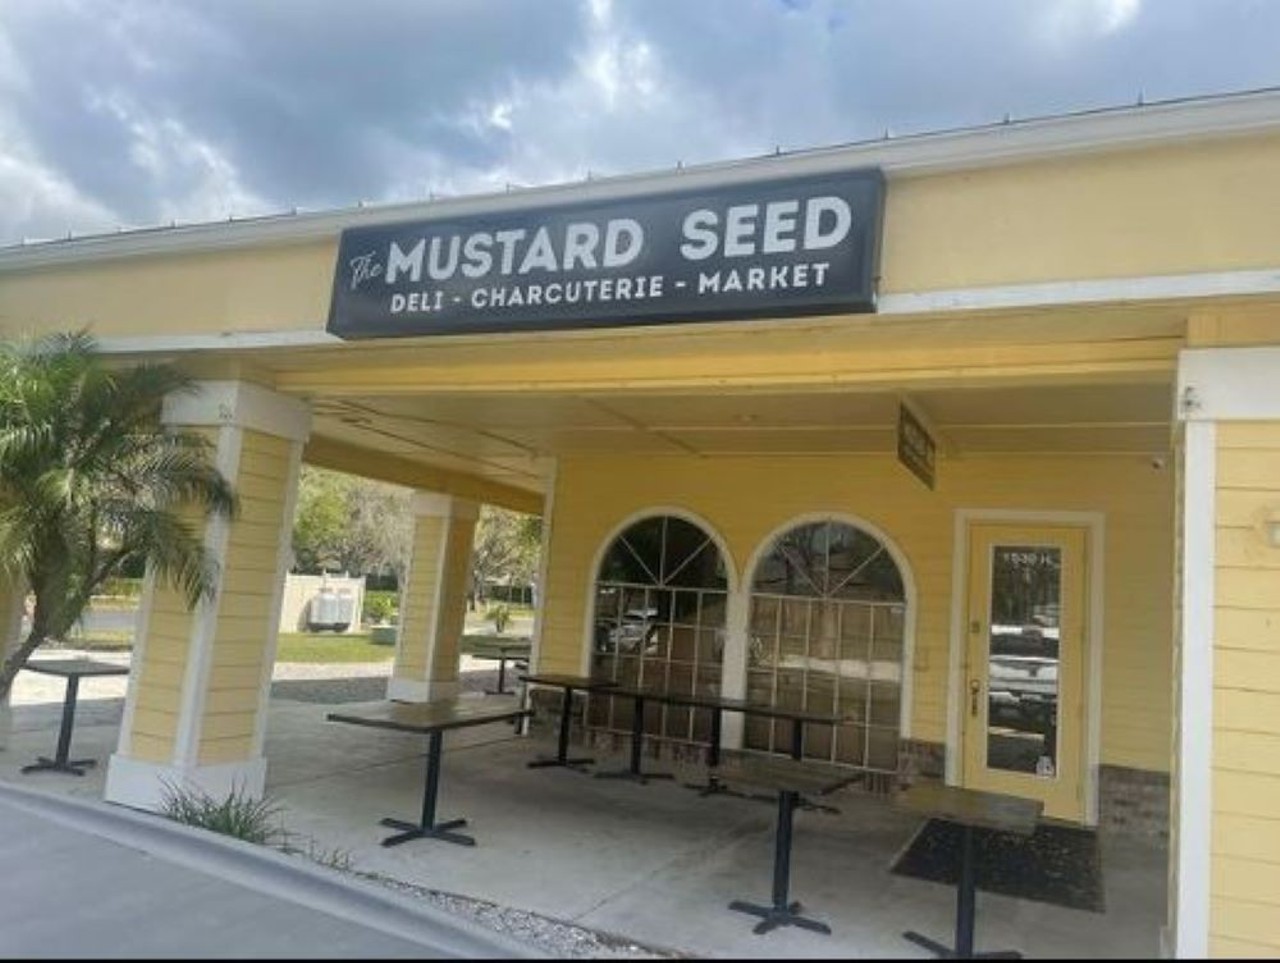 The Mustard Seed Deli & Charcuterie Market
5 out 5 stars, 24 reviews
1532 Land O' Lakes Blvd Ste H, Lutz 
” The staff was very friendly from the start, inside has a lot of different items to purchase for gifts and to take home. Deli meats, great cheeses and much more!  The prices were reasonable considering you can tell everything was fresh!  The chicken parm sandwich was great.  It had a pesto smeared on one layer that really made the sandwich pop.  The grandma's potato salad was good too, different than a typical potato but in a good way!” - Michelle S.
Photo via The  Mustard Seed Deli/Instagram